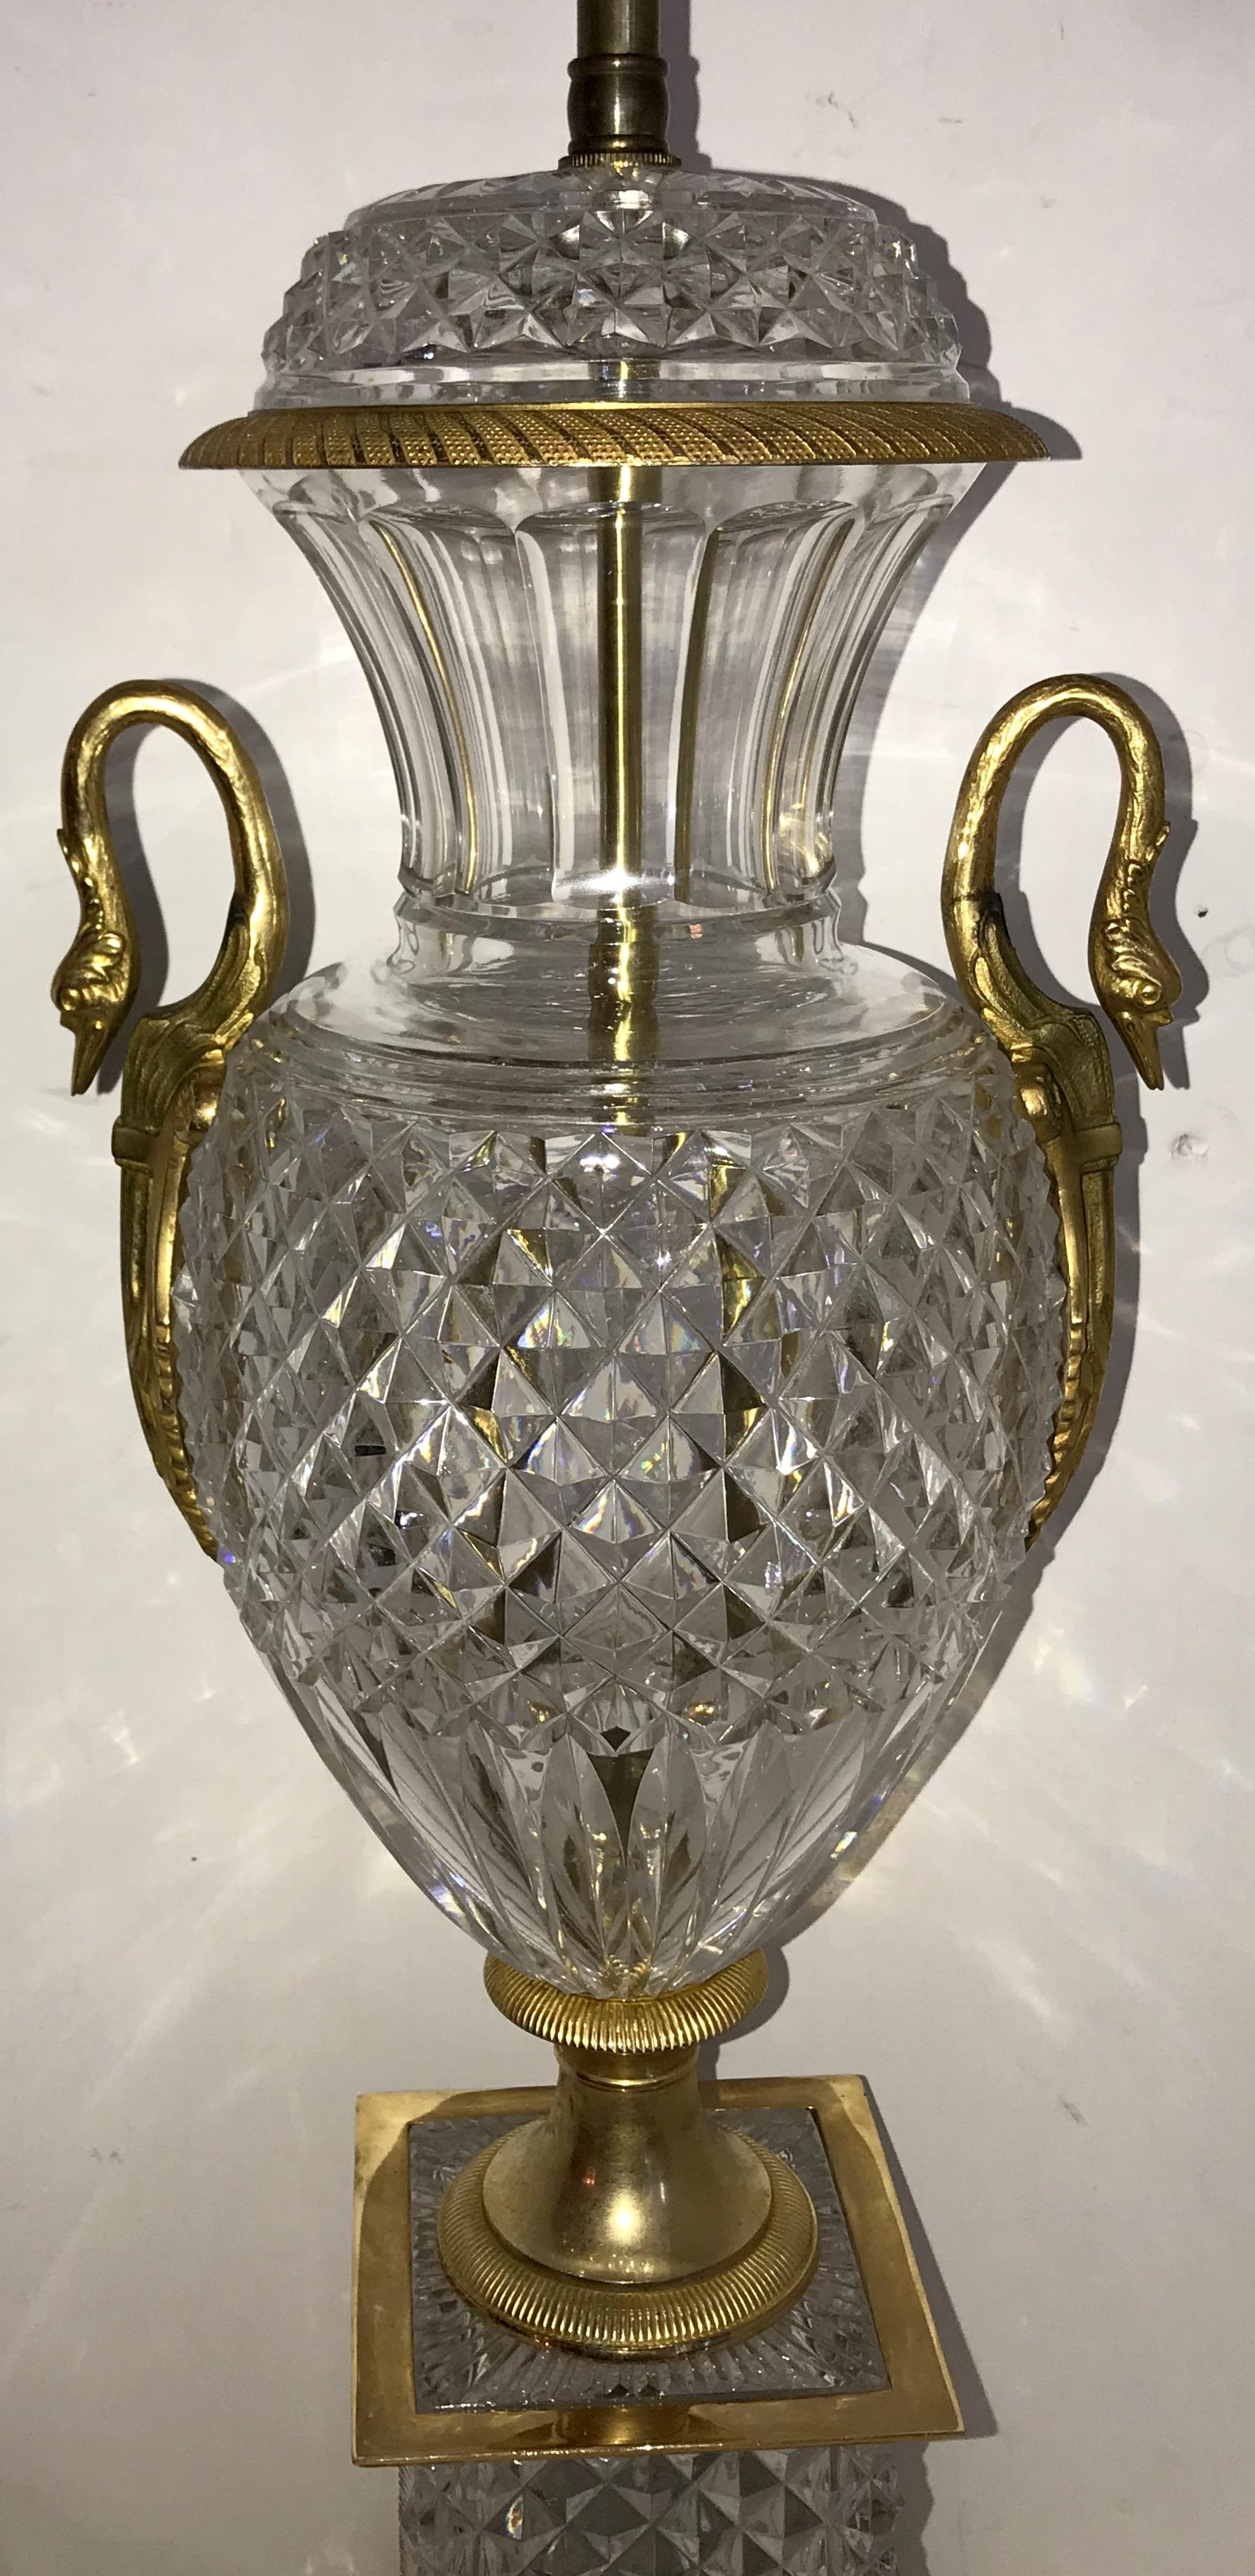 A fine pair of French neoclassical cut crystal urn form and gilt bronze-mounted swan ormolu handle large lamps with crystal lid and square base.
In the manner and quality of Baccarat.